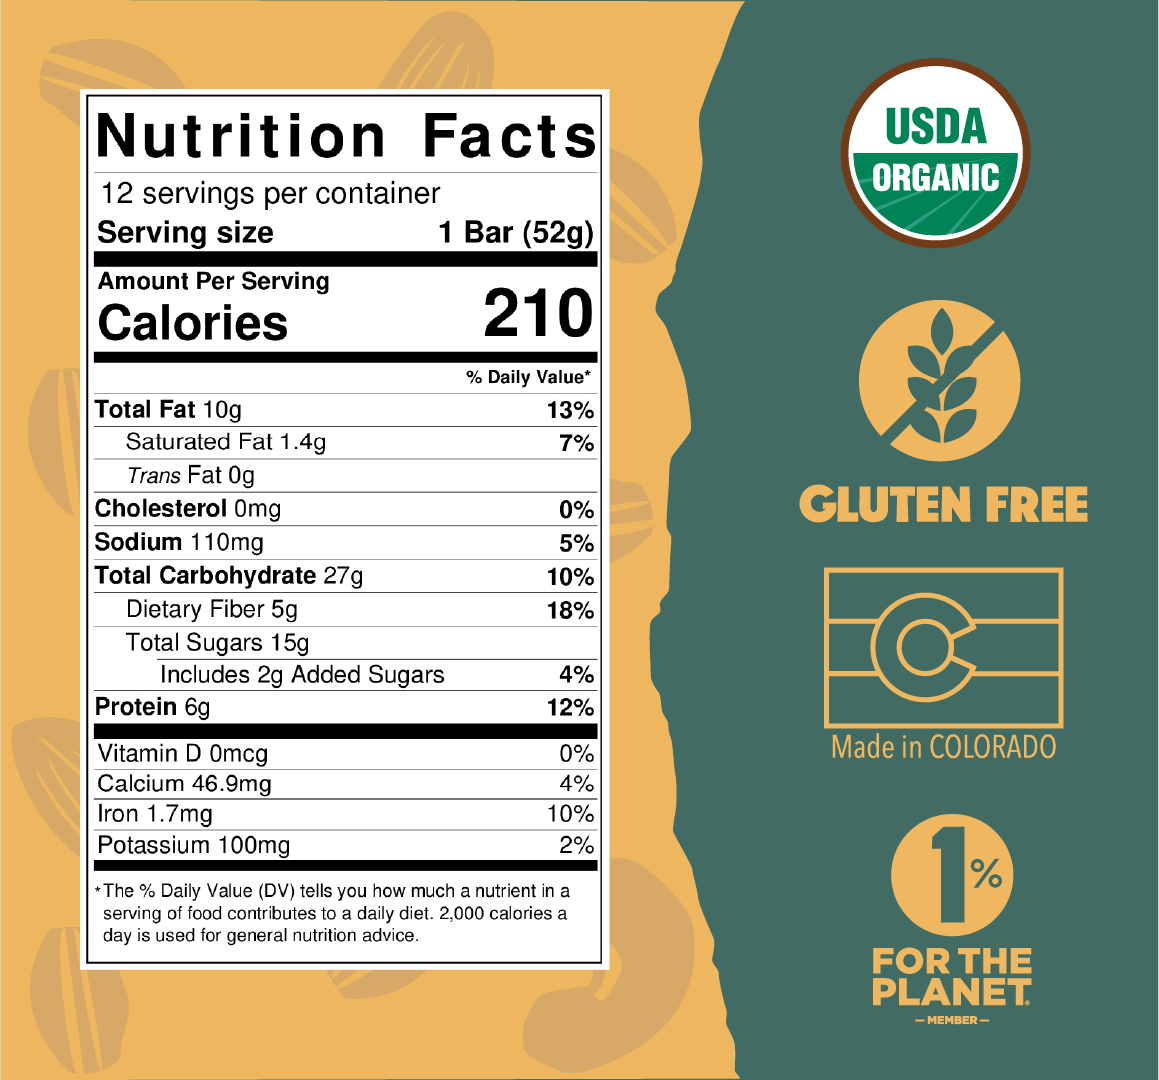 original organic certification and nutrition facts